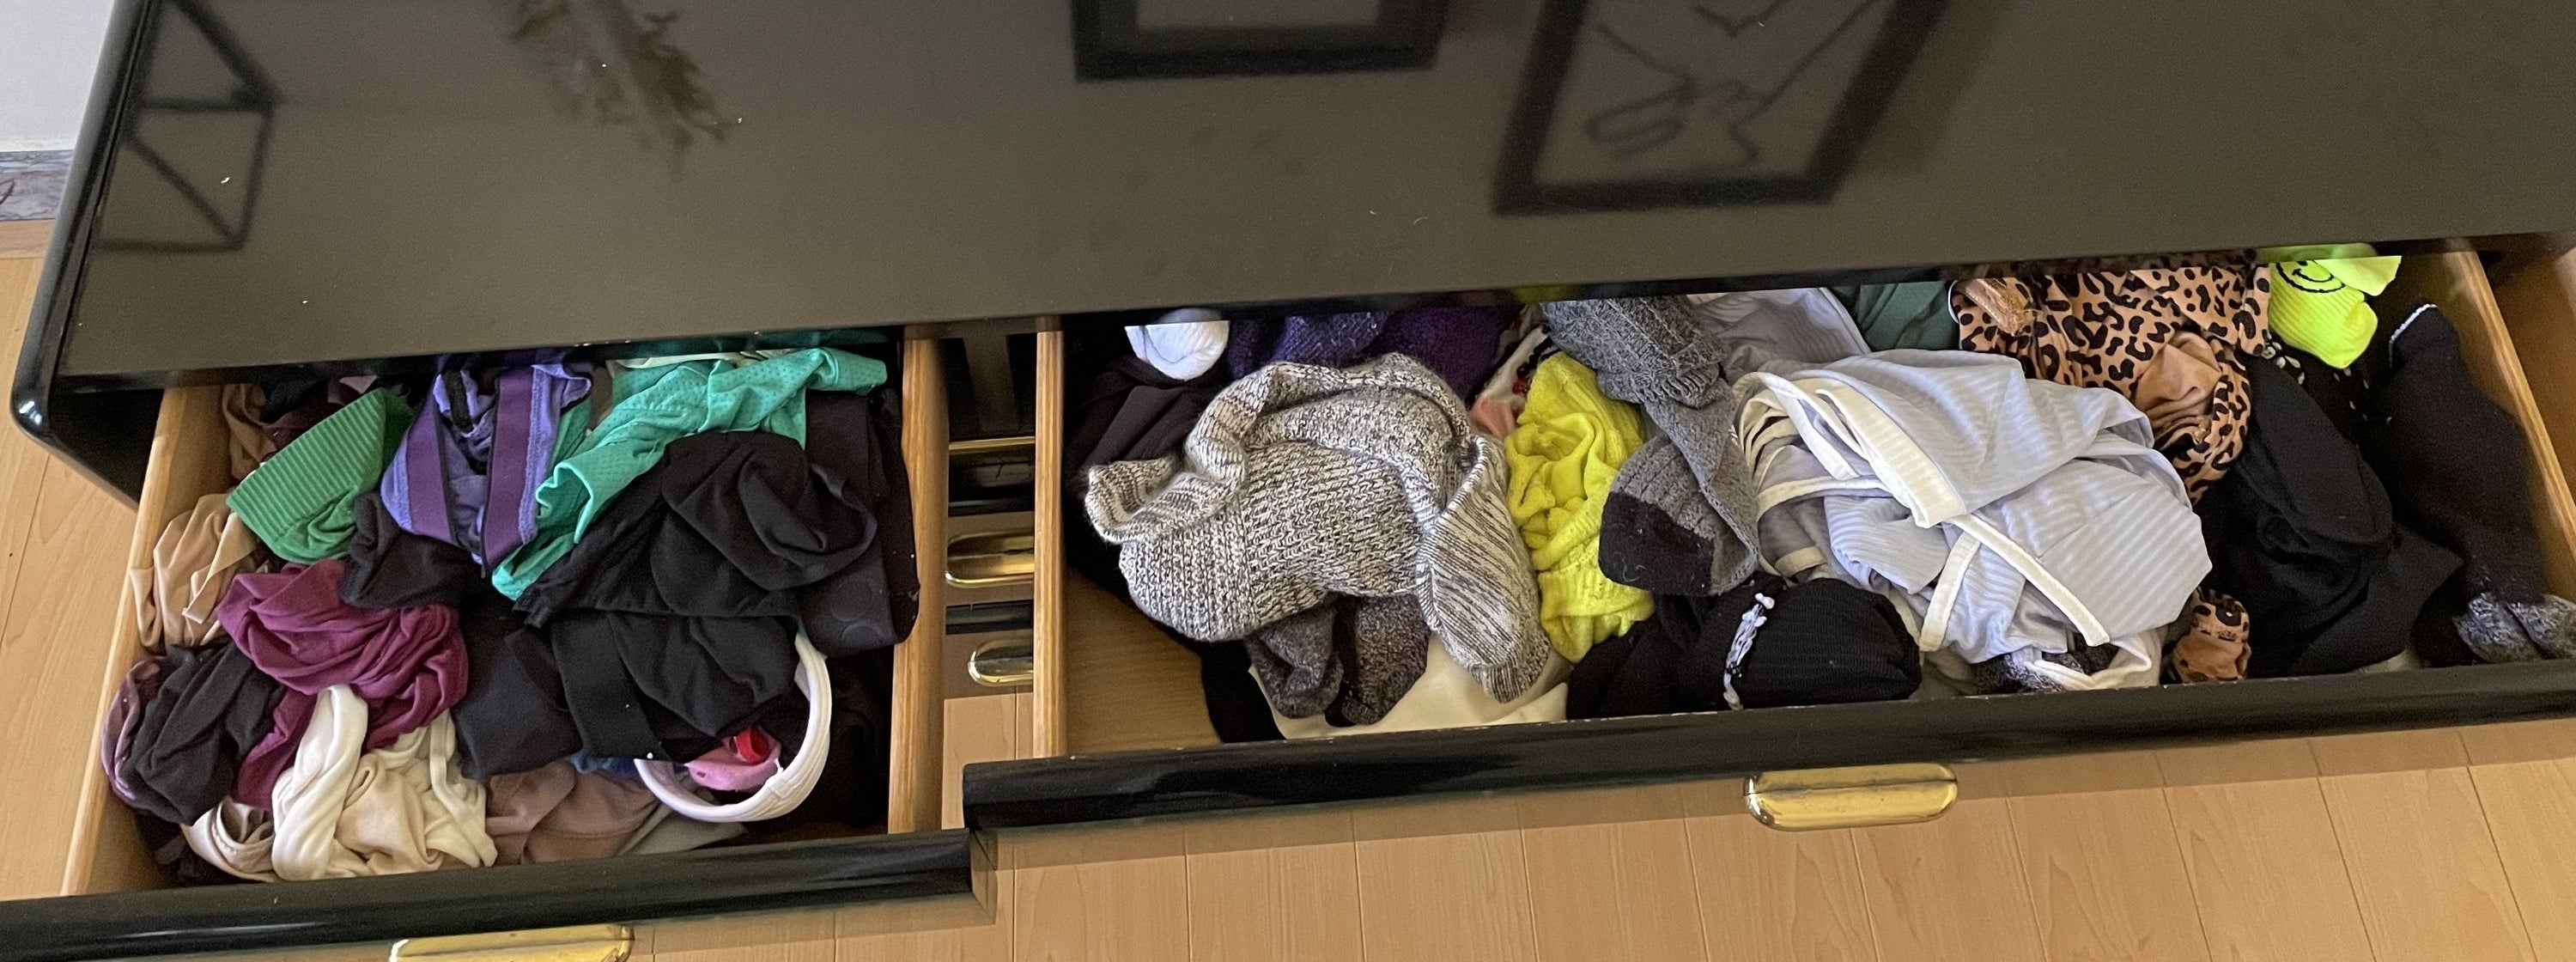 Another look at the disorganized drawers